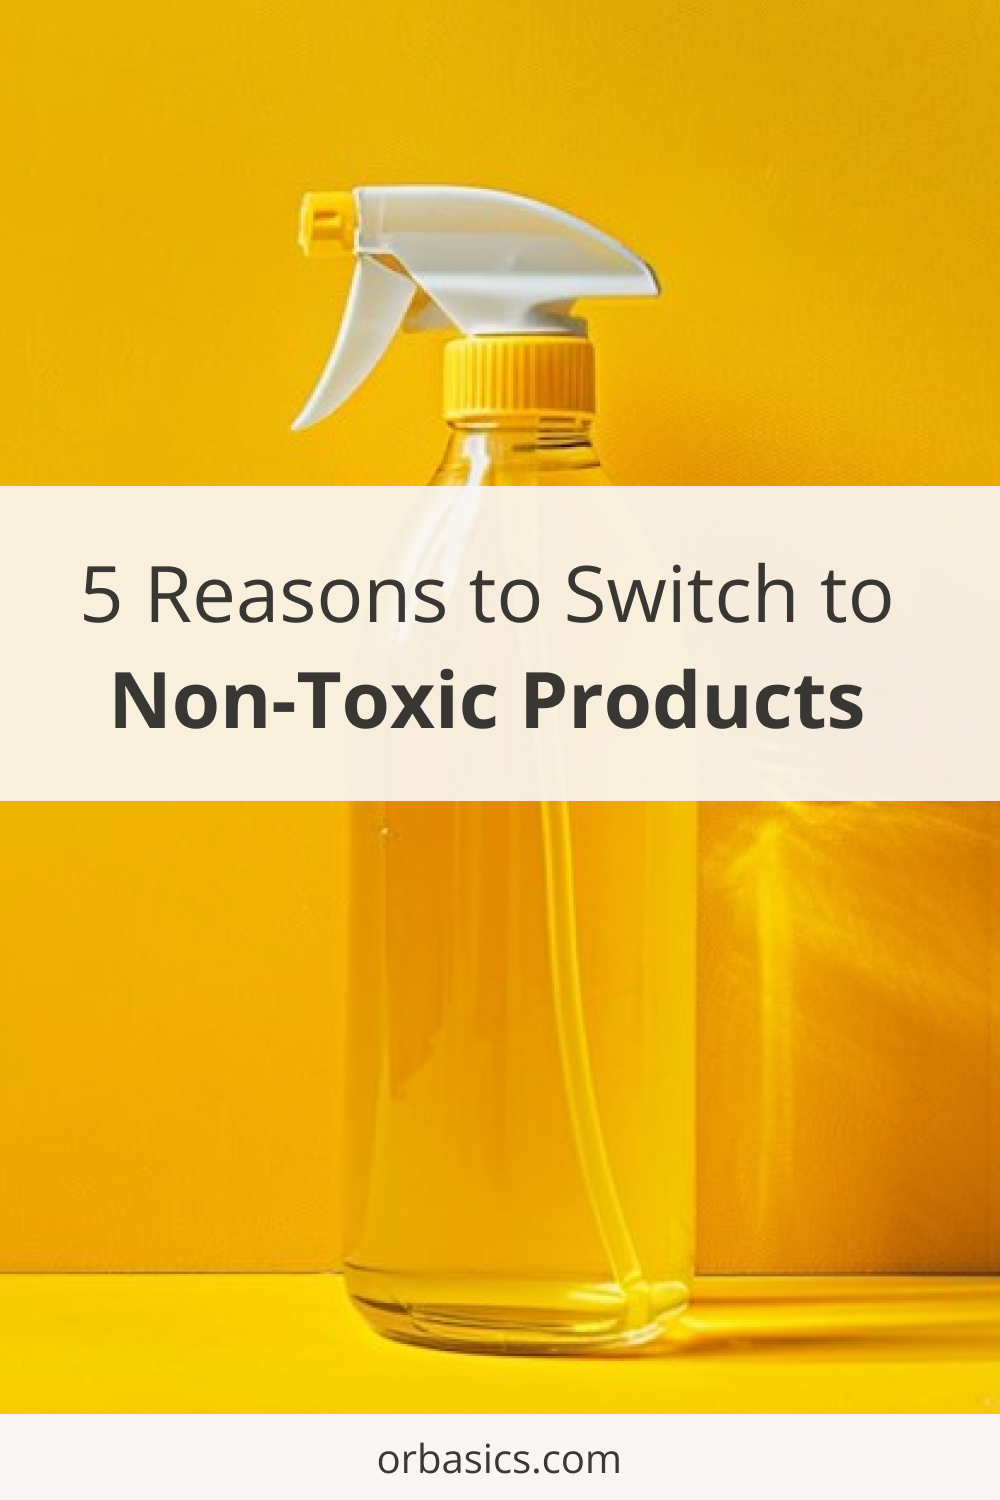 5-reasons-to-switch-to-non-toxics-products